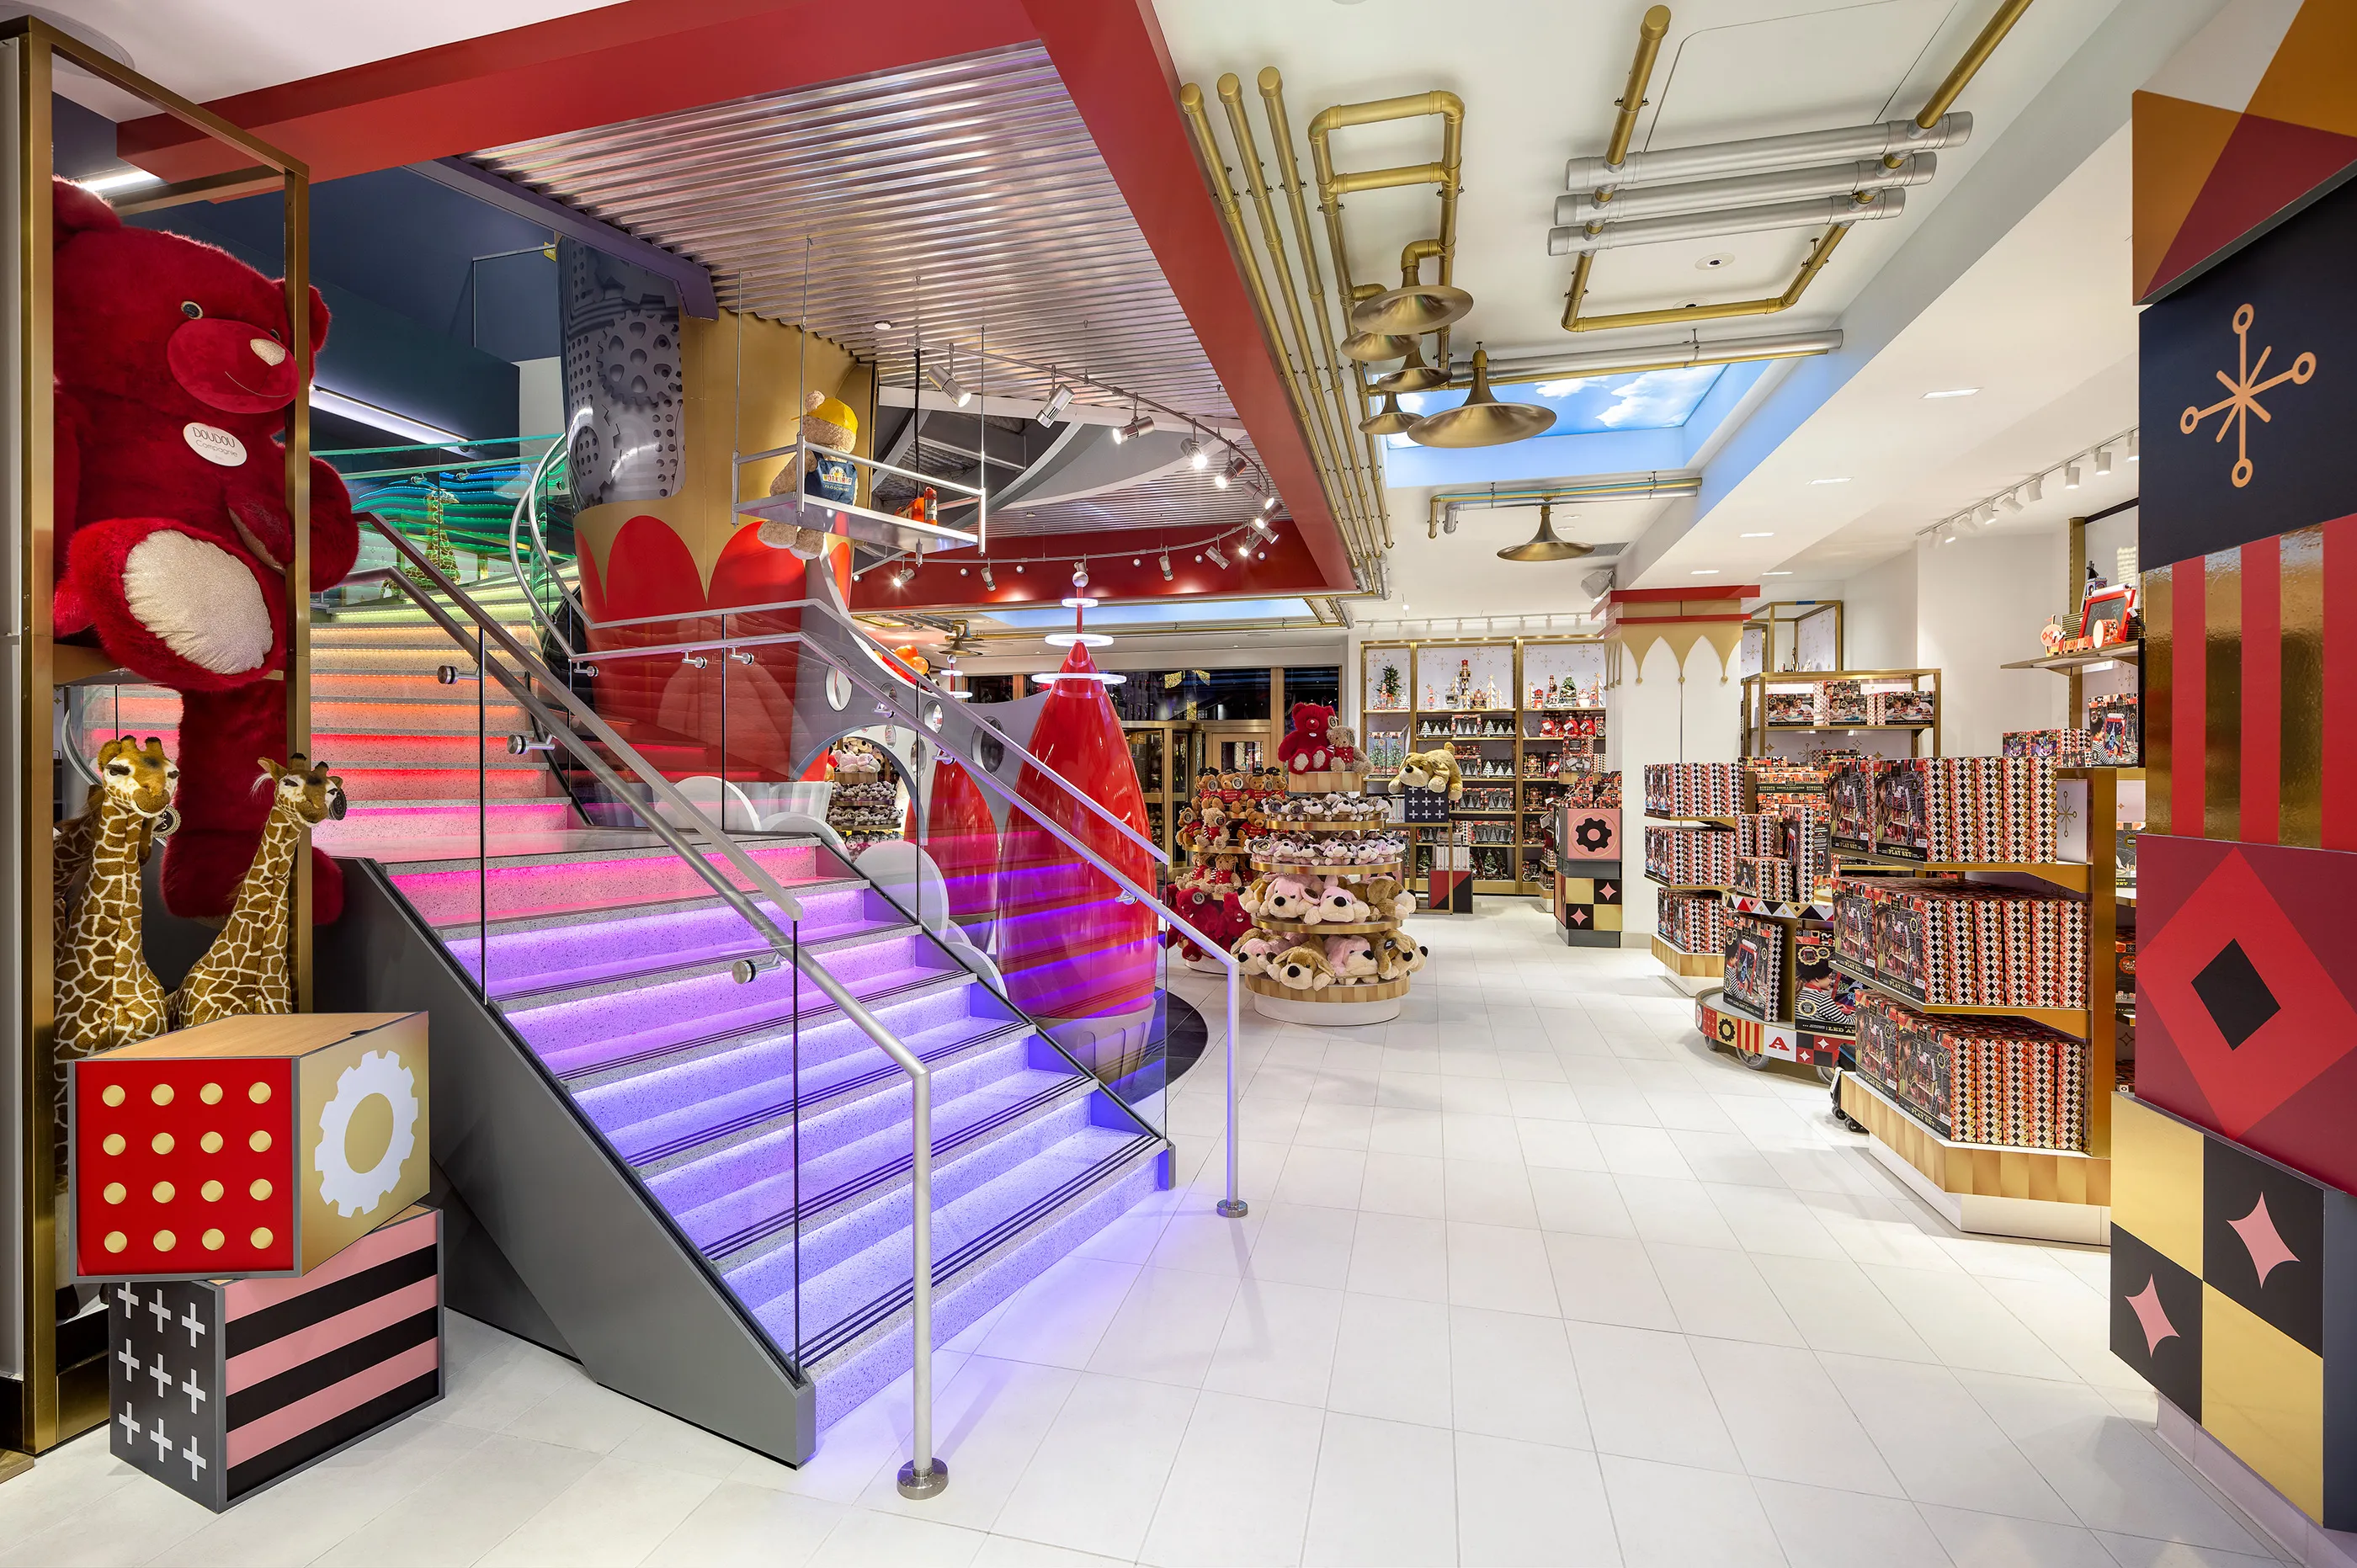 FAO Schwarz is back in New York, here's what its new store looks like